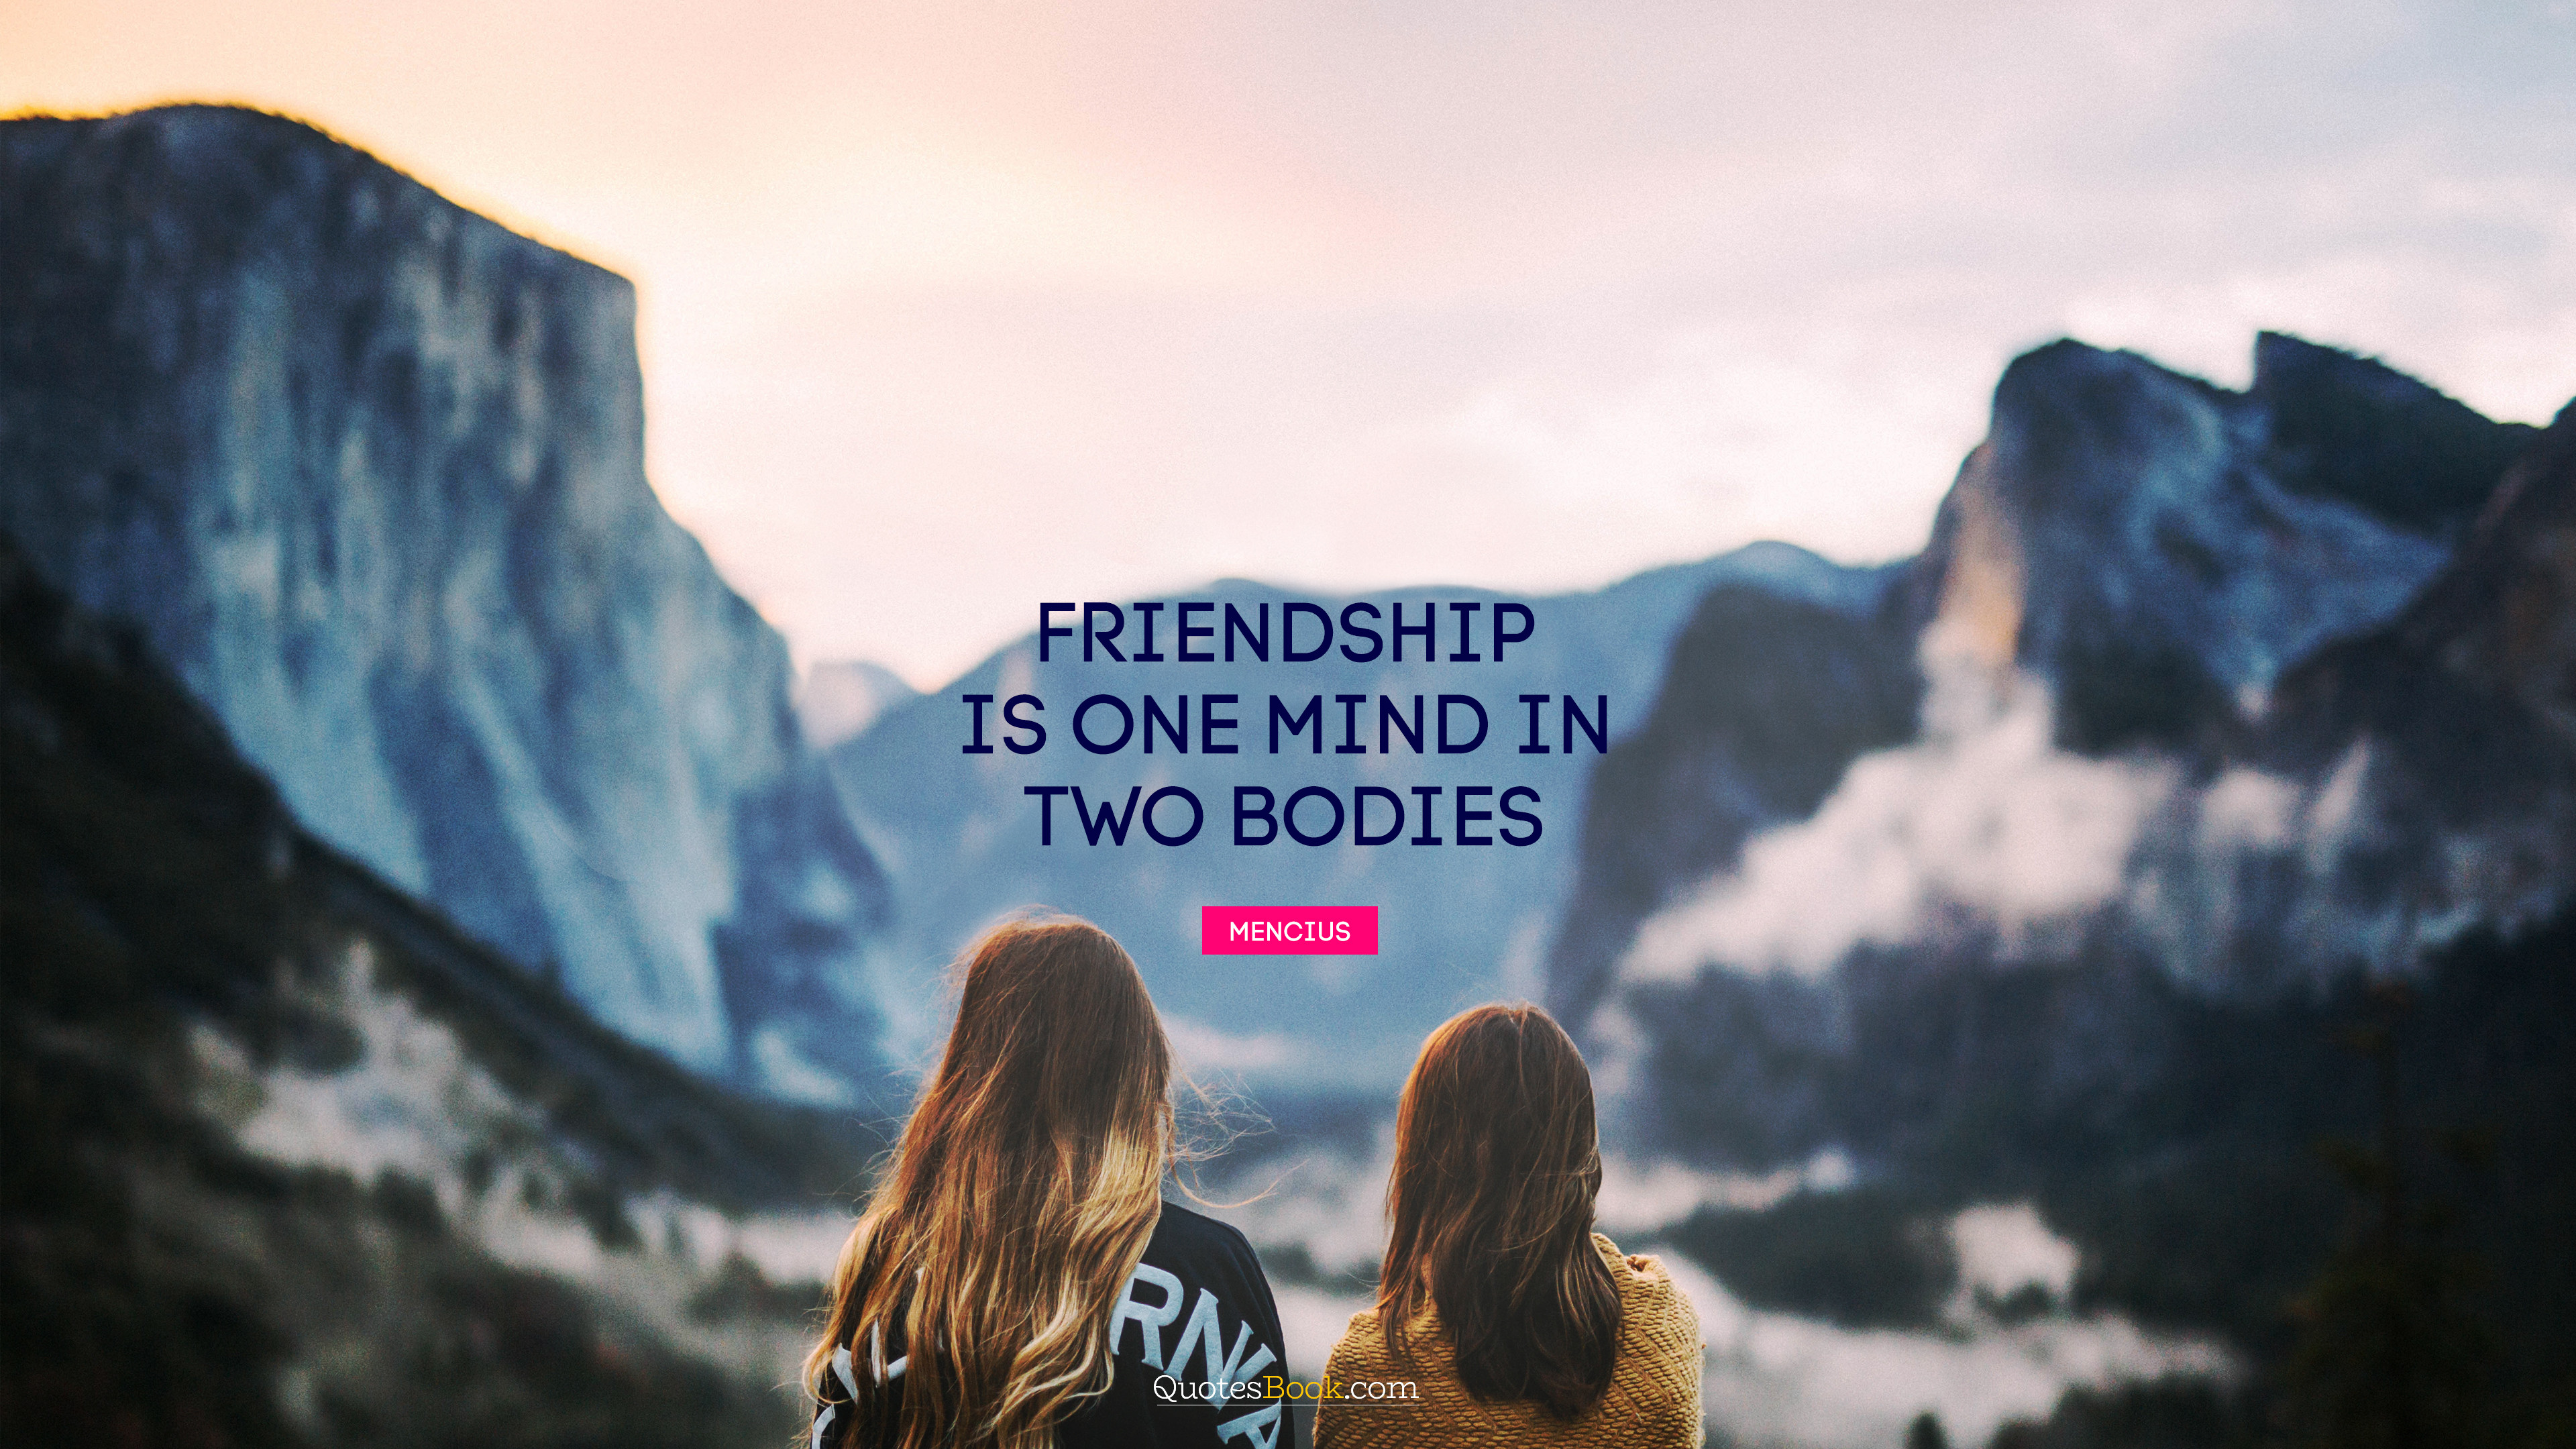 Friendship is one mind in two bodies. - Quote by Mencius - QuotesBook